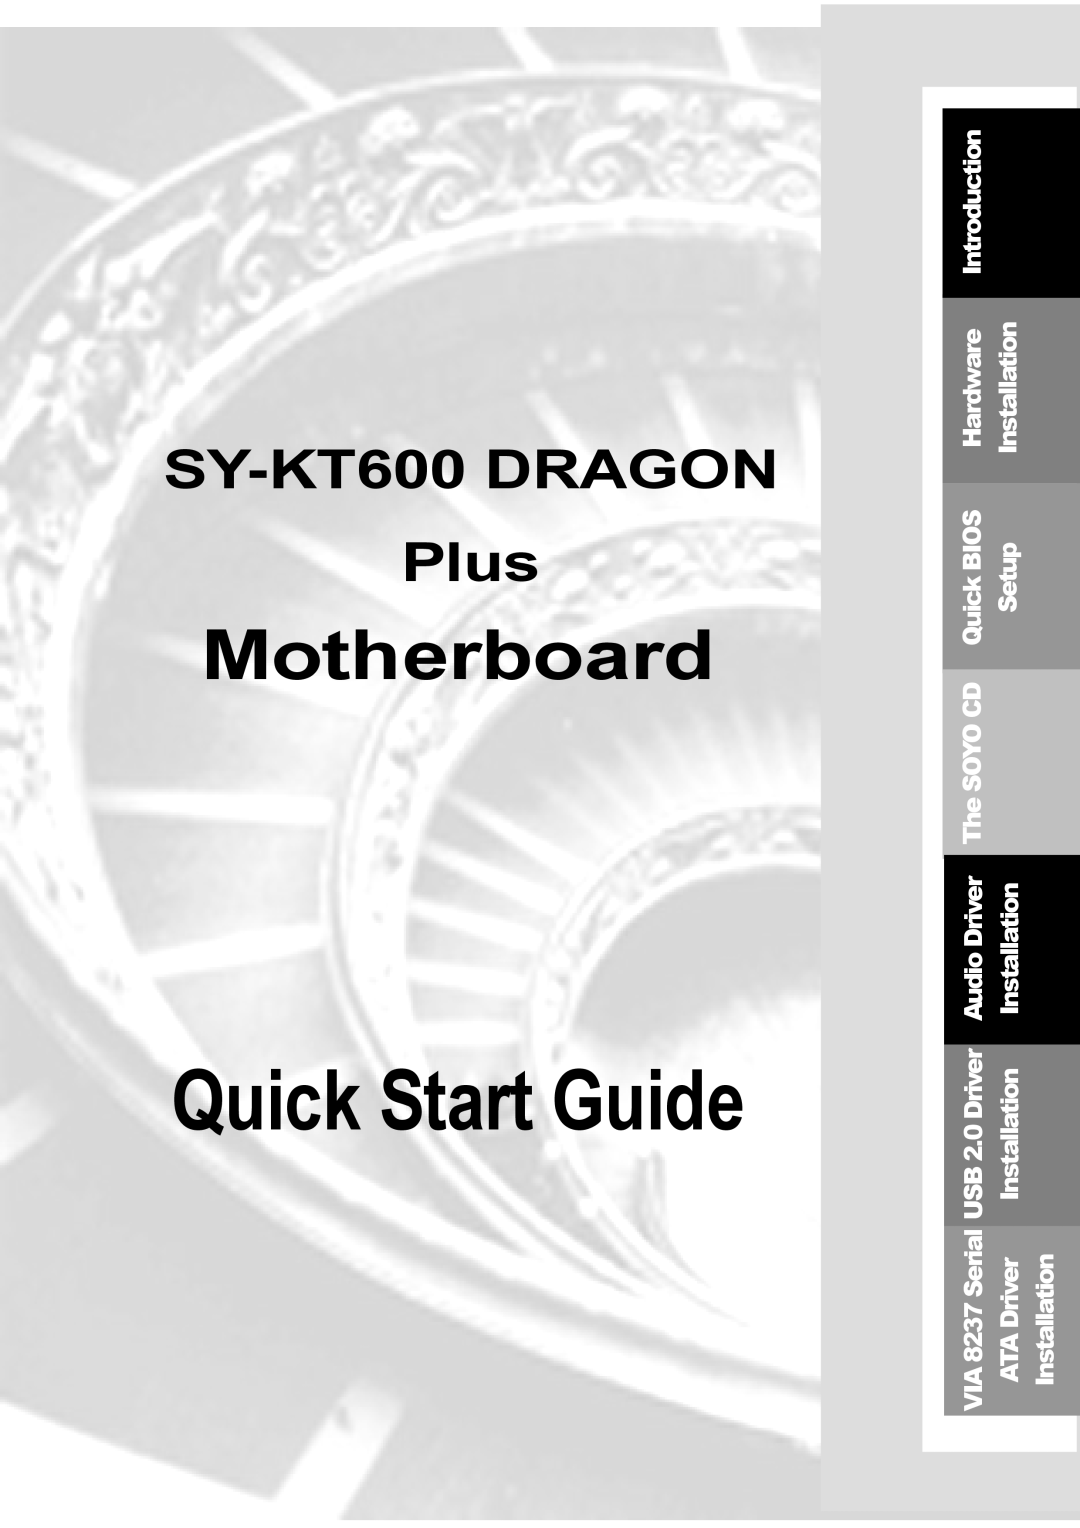 SOYO SY-KT600 DRAGON Plus Motherboard quick start Introduction, Hardware, Installation, Quick BIOS, Setup, USB 2.0 Driver 